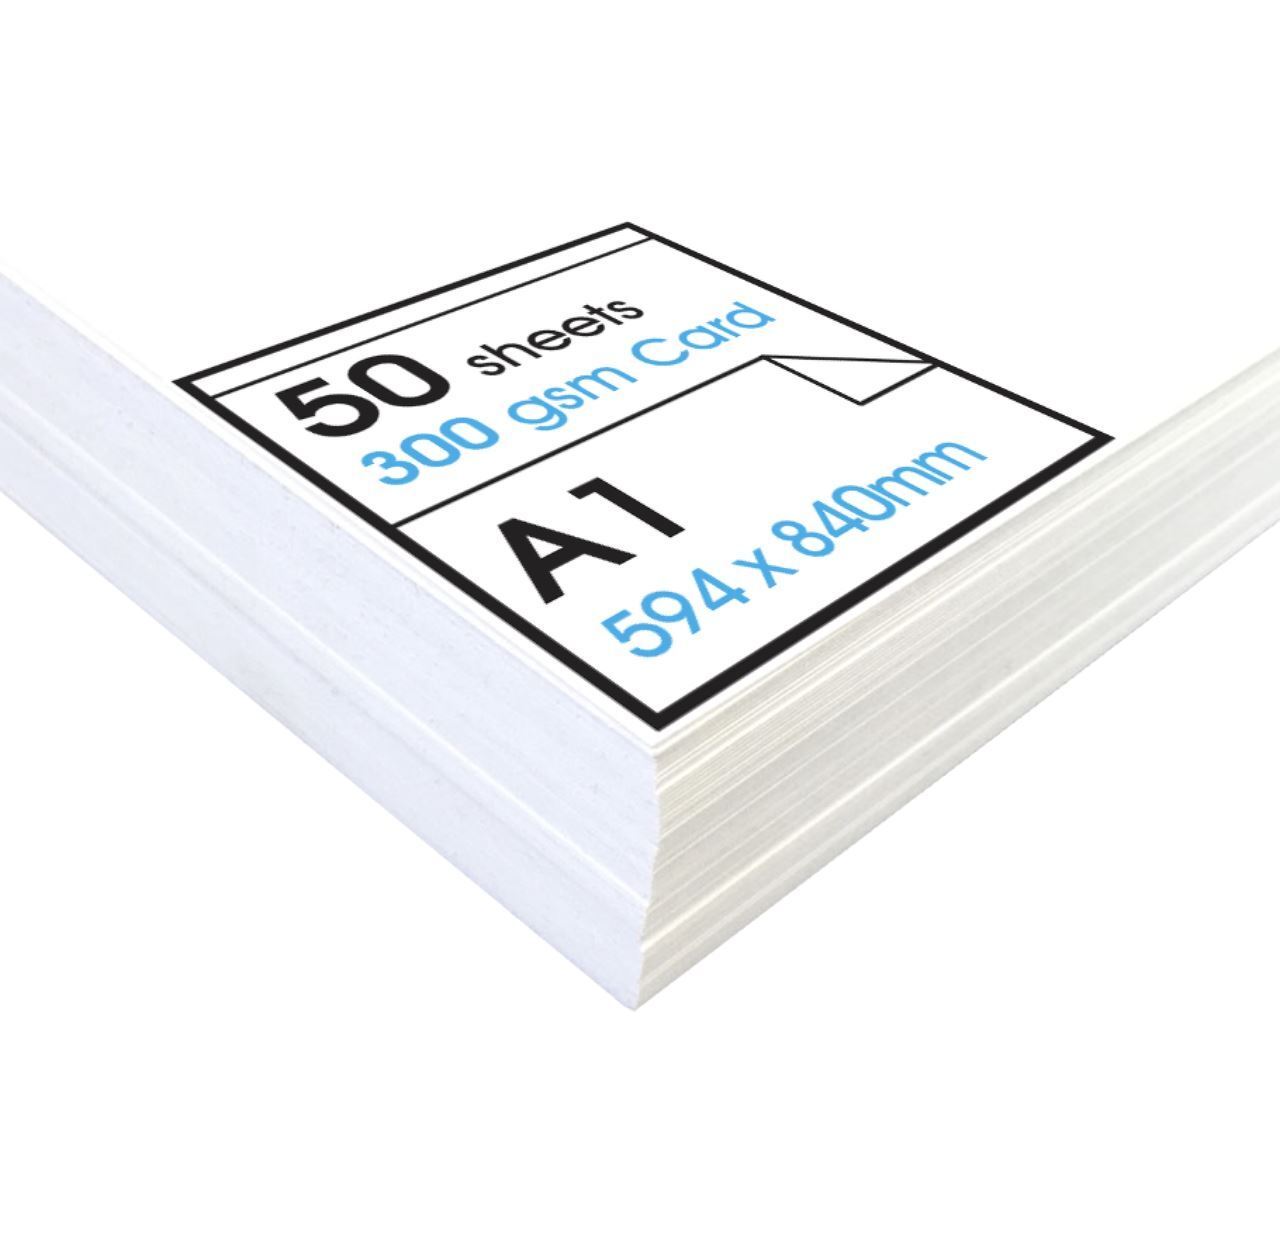 Protectafile Artwayy STUDIO 300gsm White Card - A3, A2 & A1 Pack